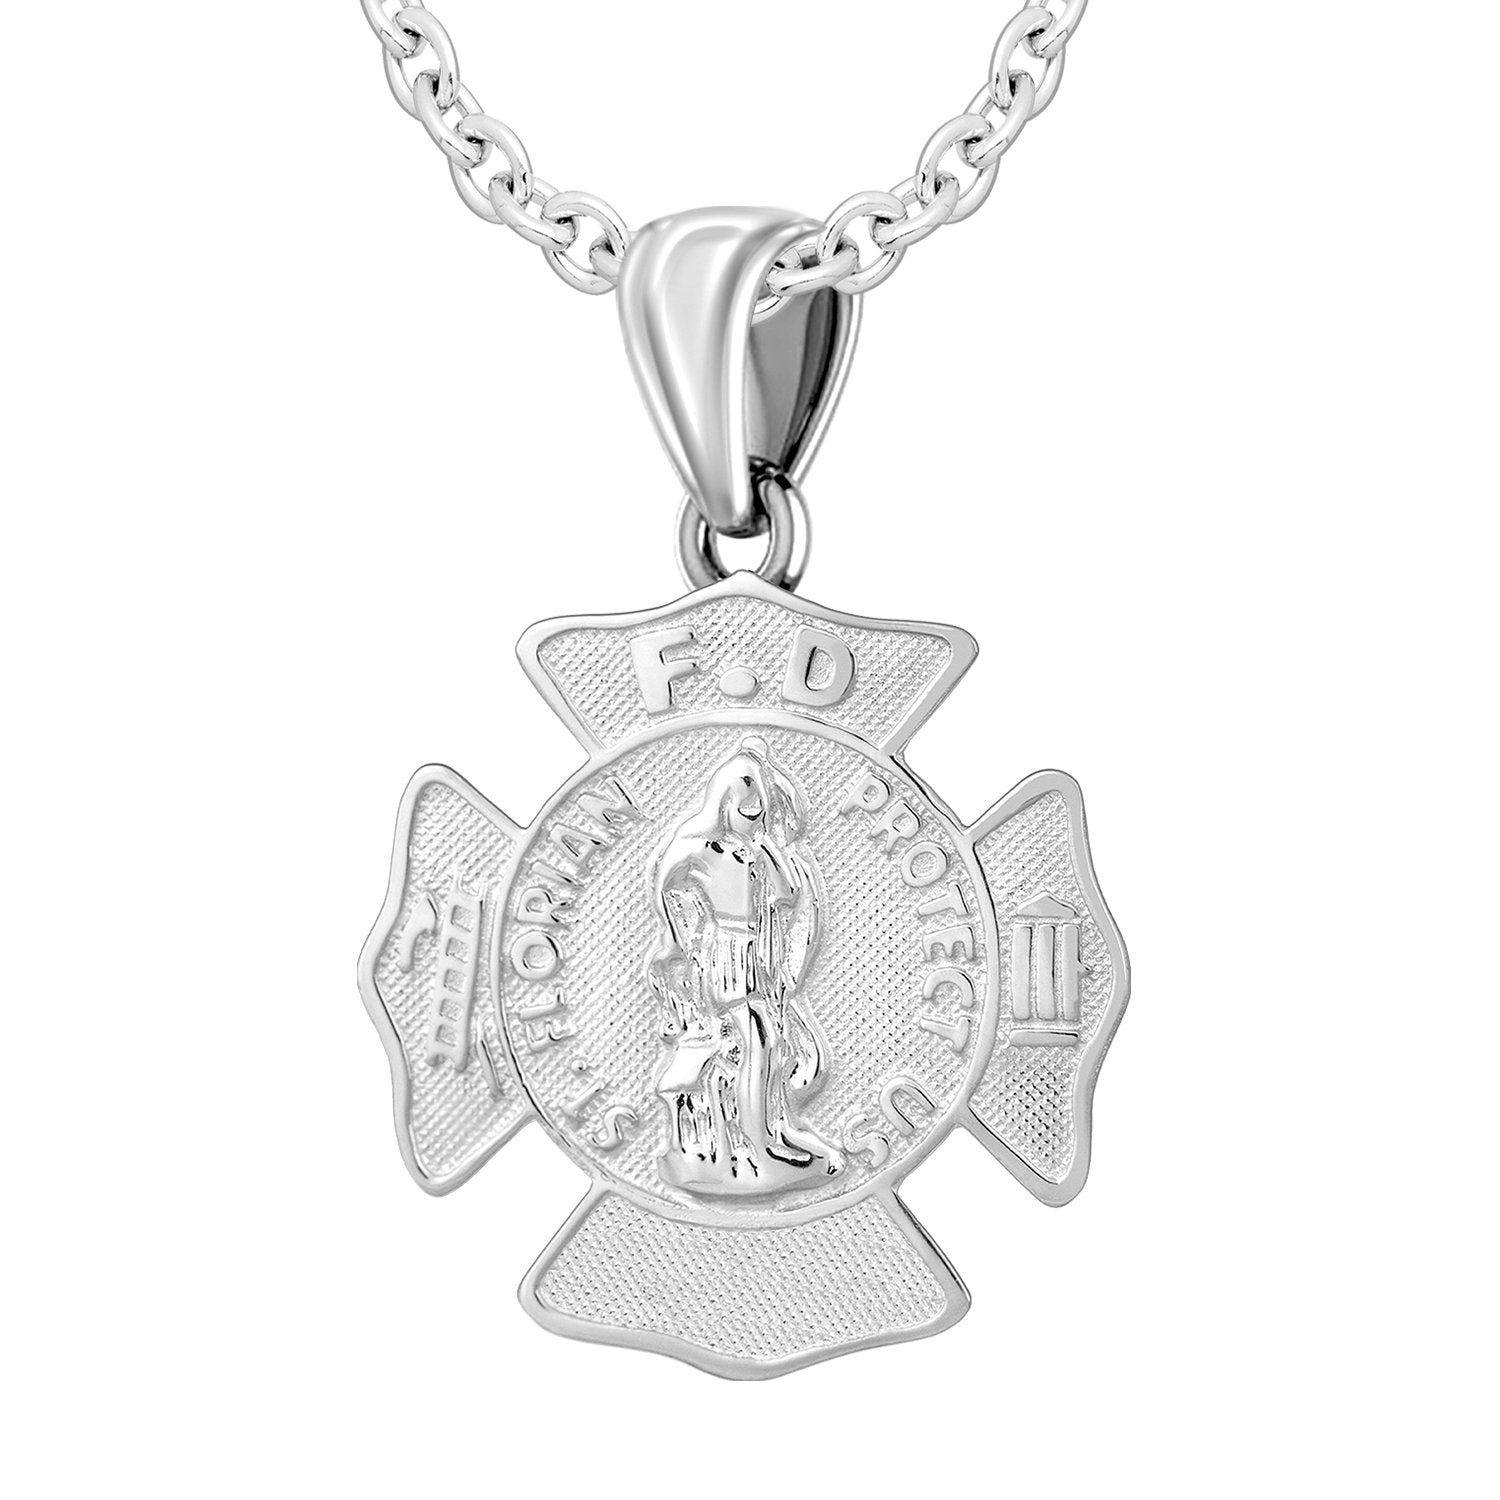 Firefighter Pendant In 925 Silver - 2mm Cable Chain